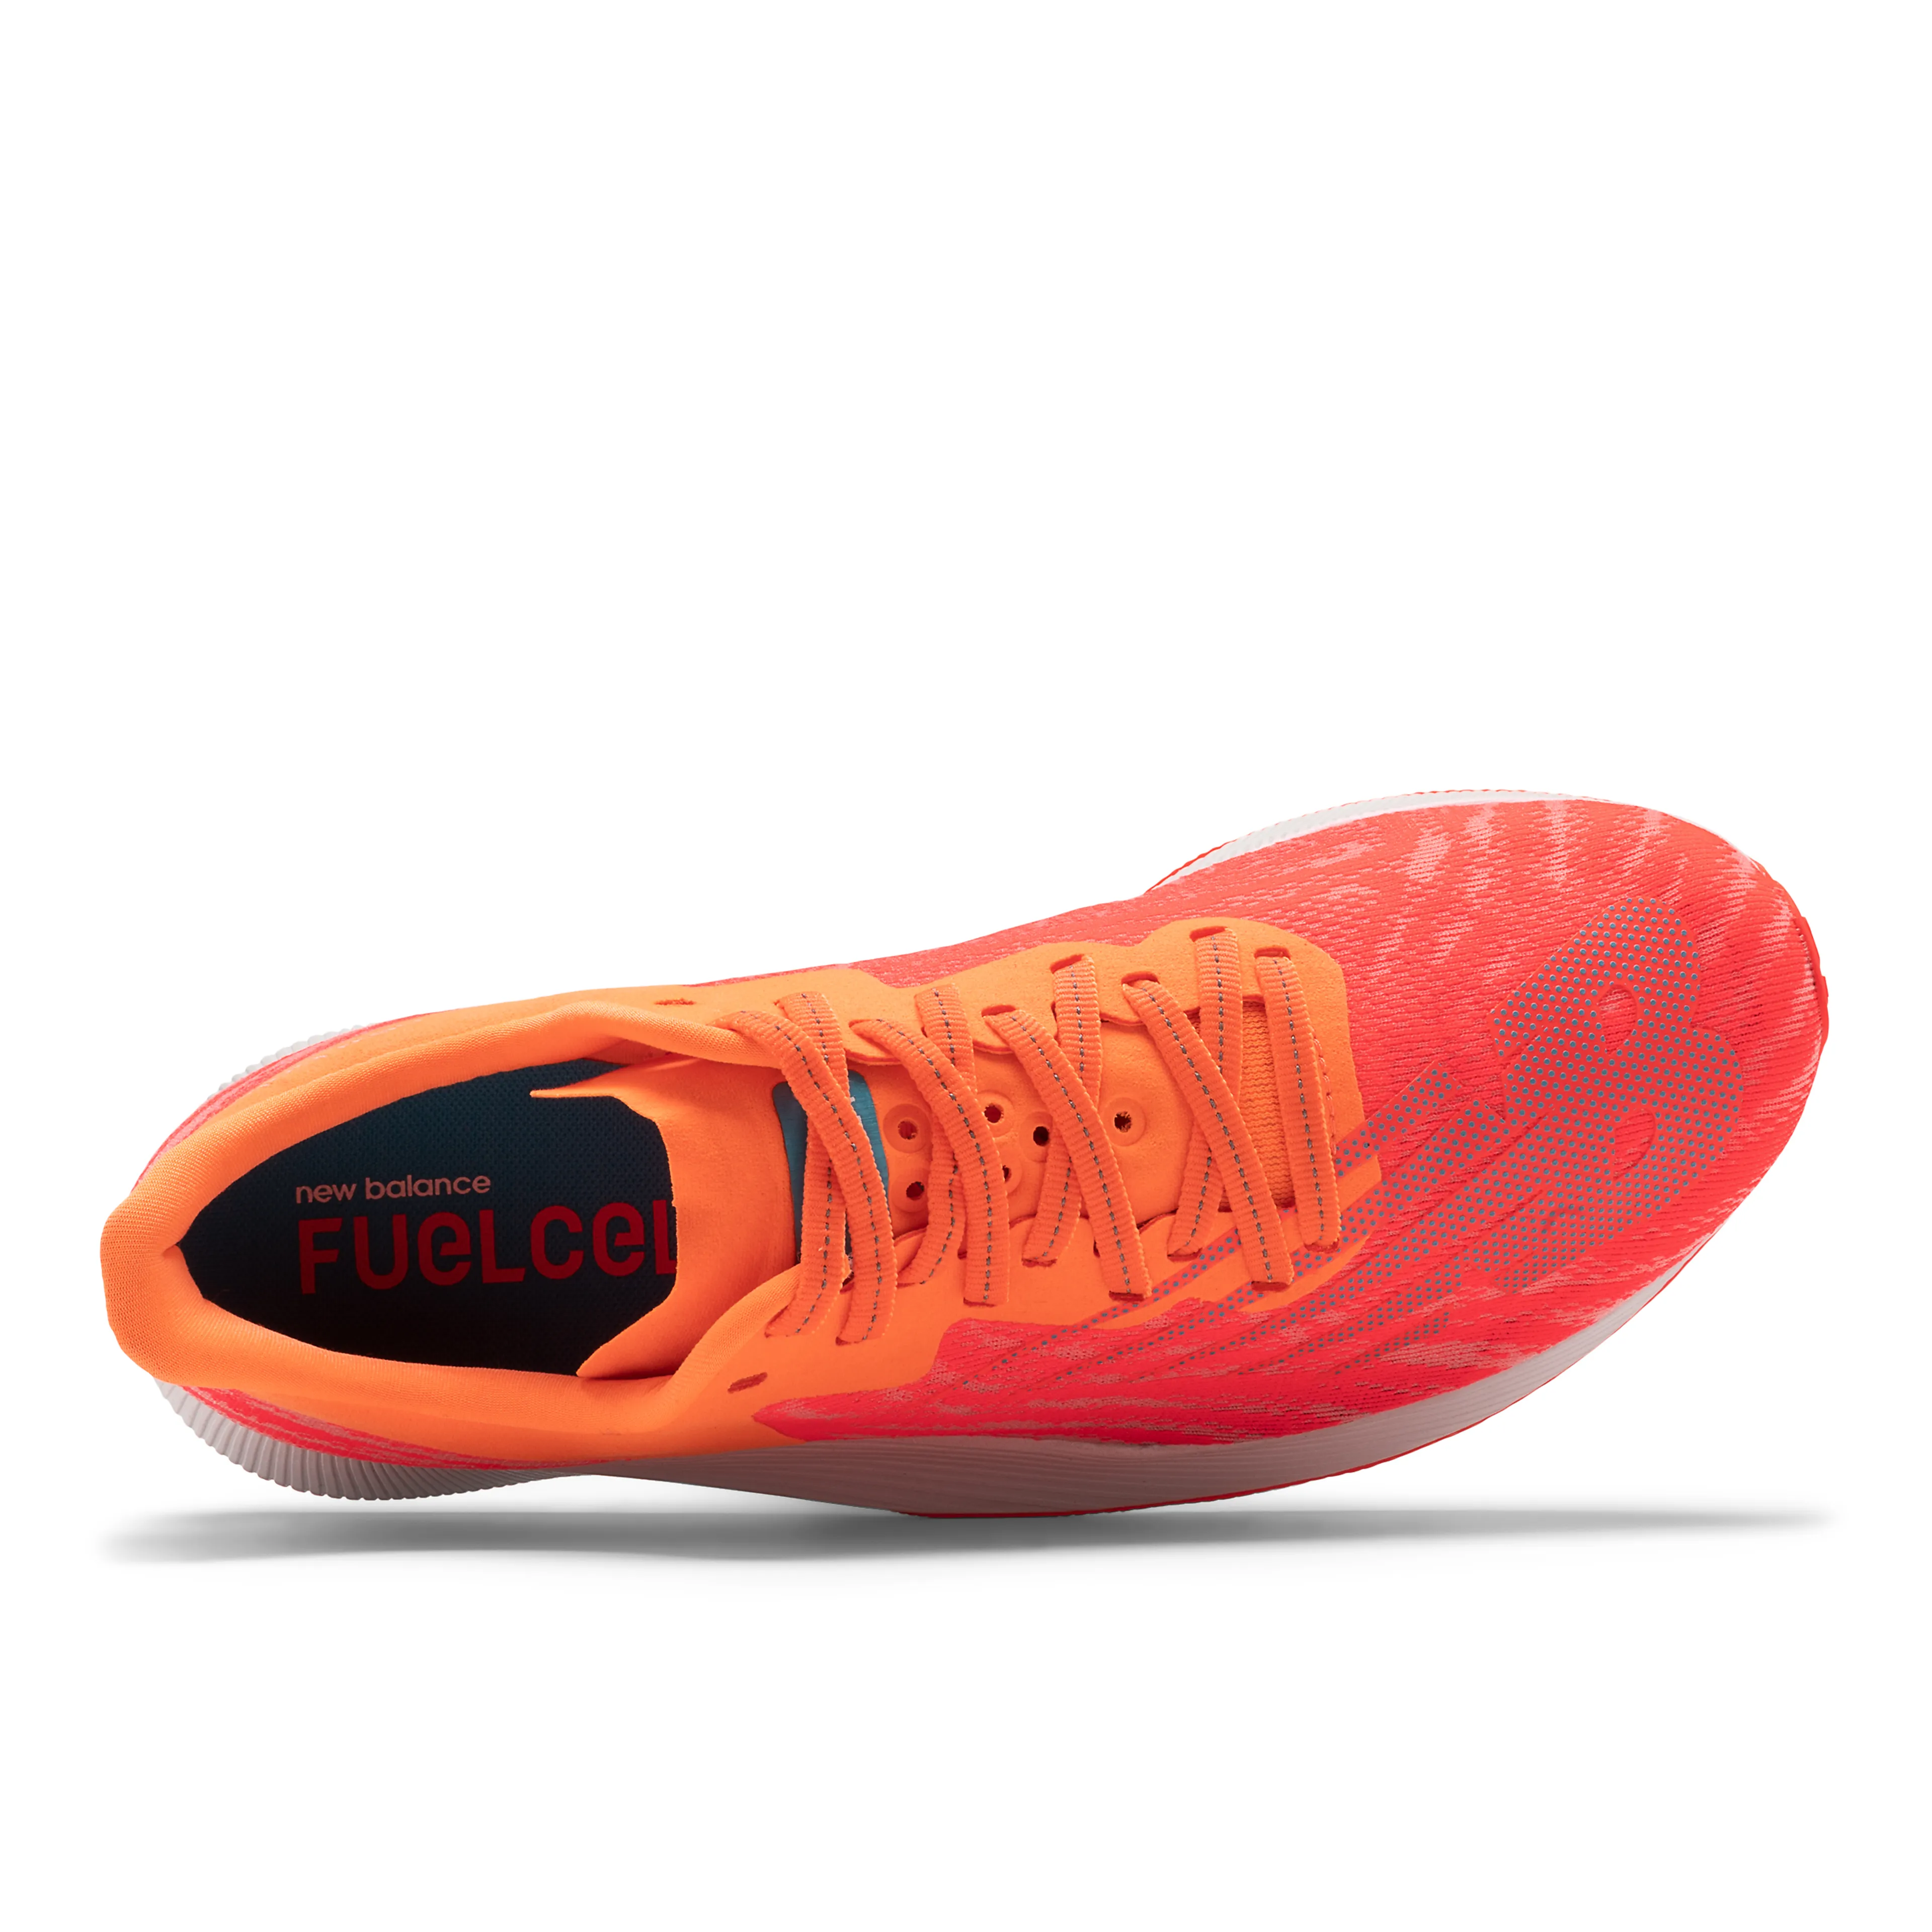 New Balance Fuelcell TC